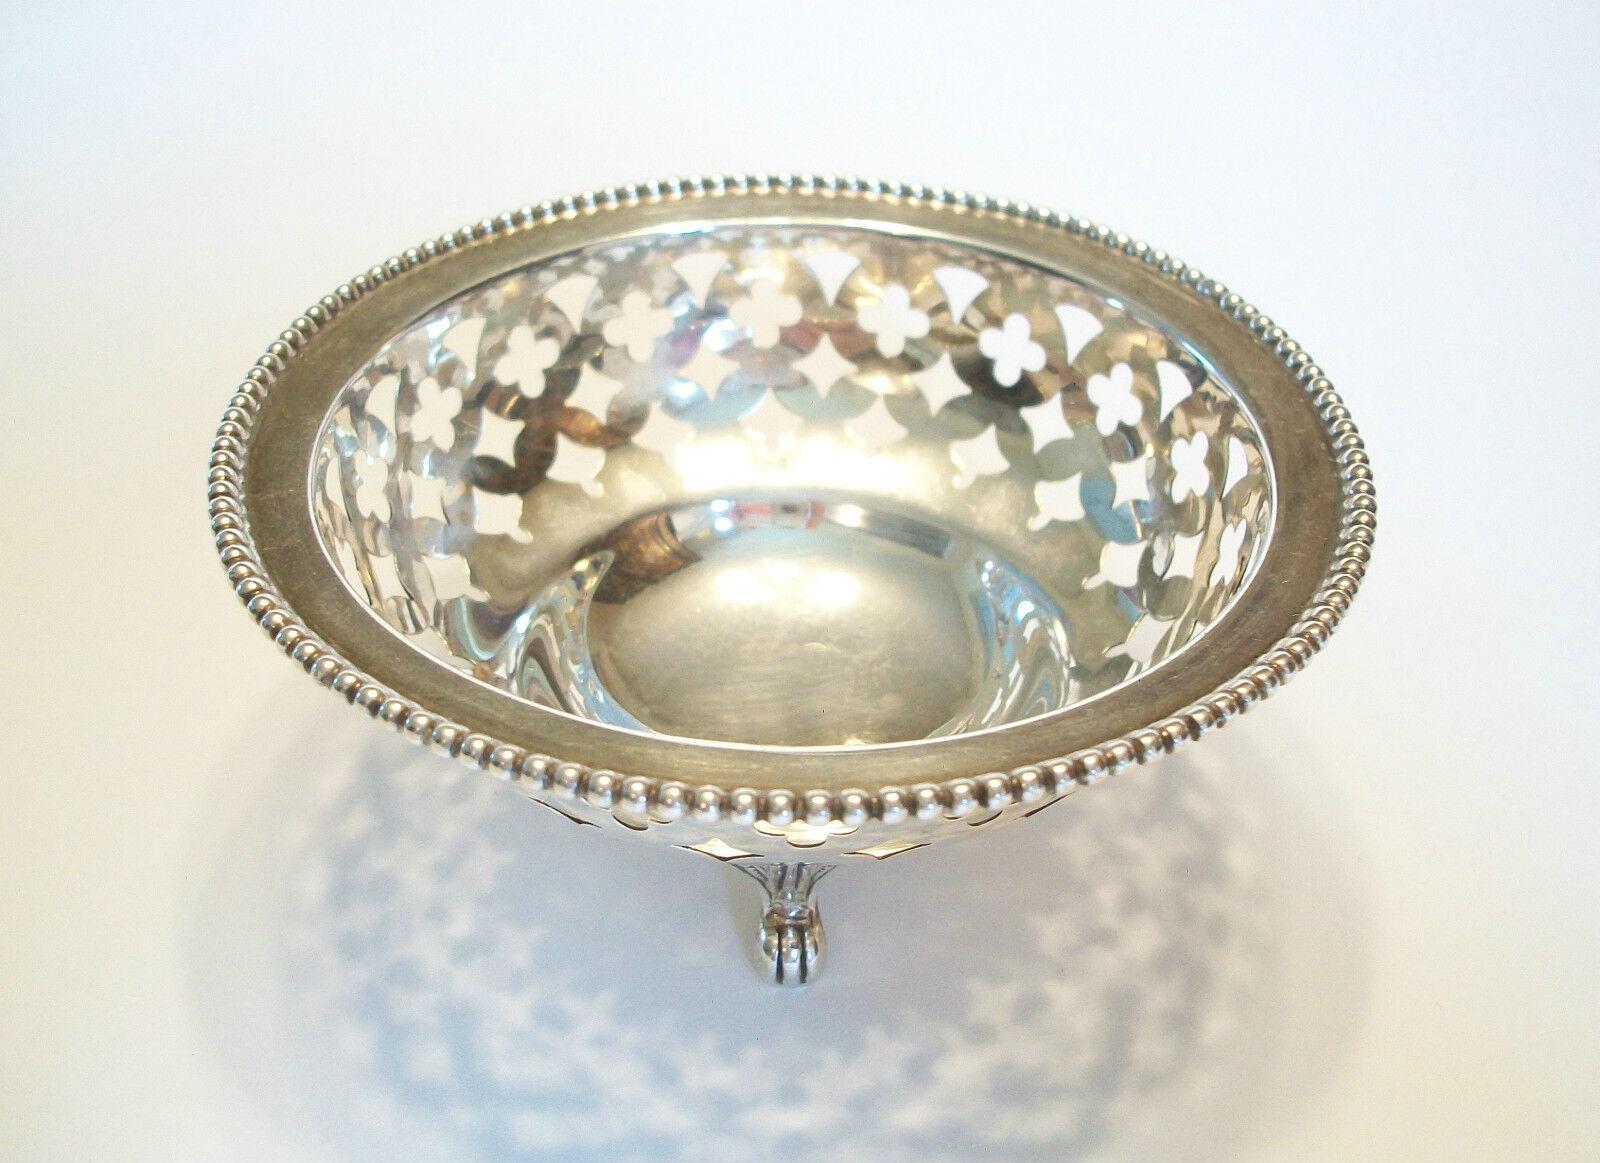 Hand-Crafted RYRIE BROS. - Pierced Sterling Silver Bonbon Dish - Canada - Early 20th Century For Sale